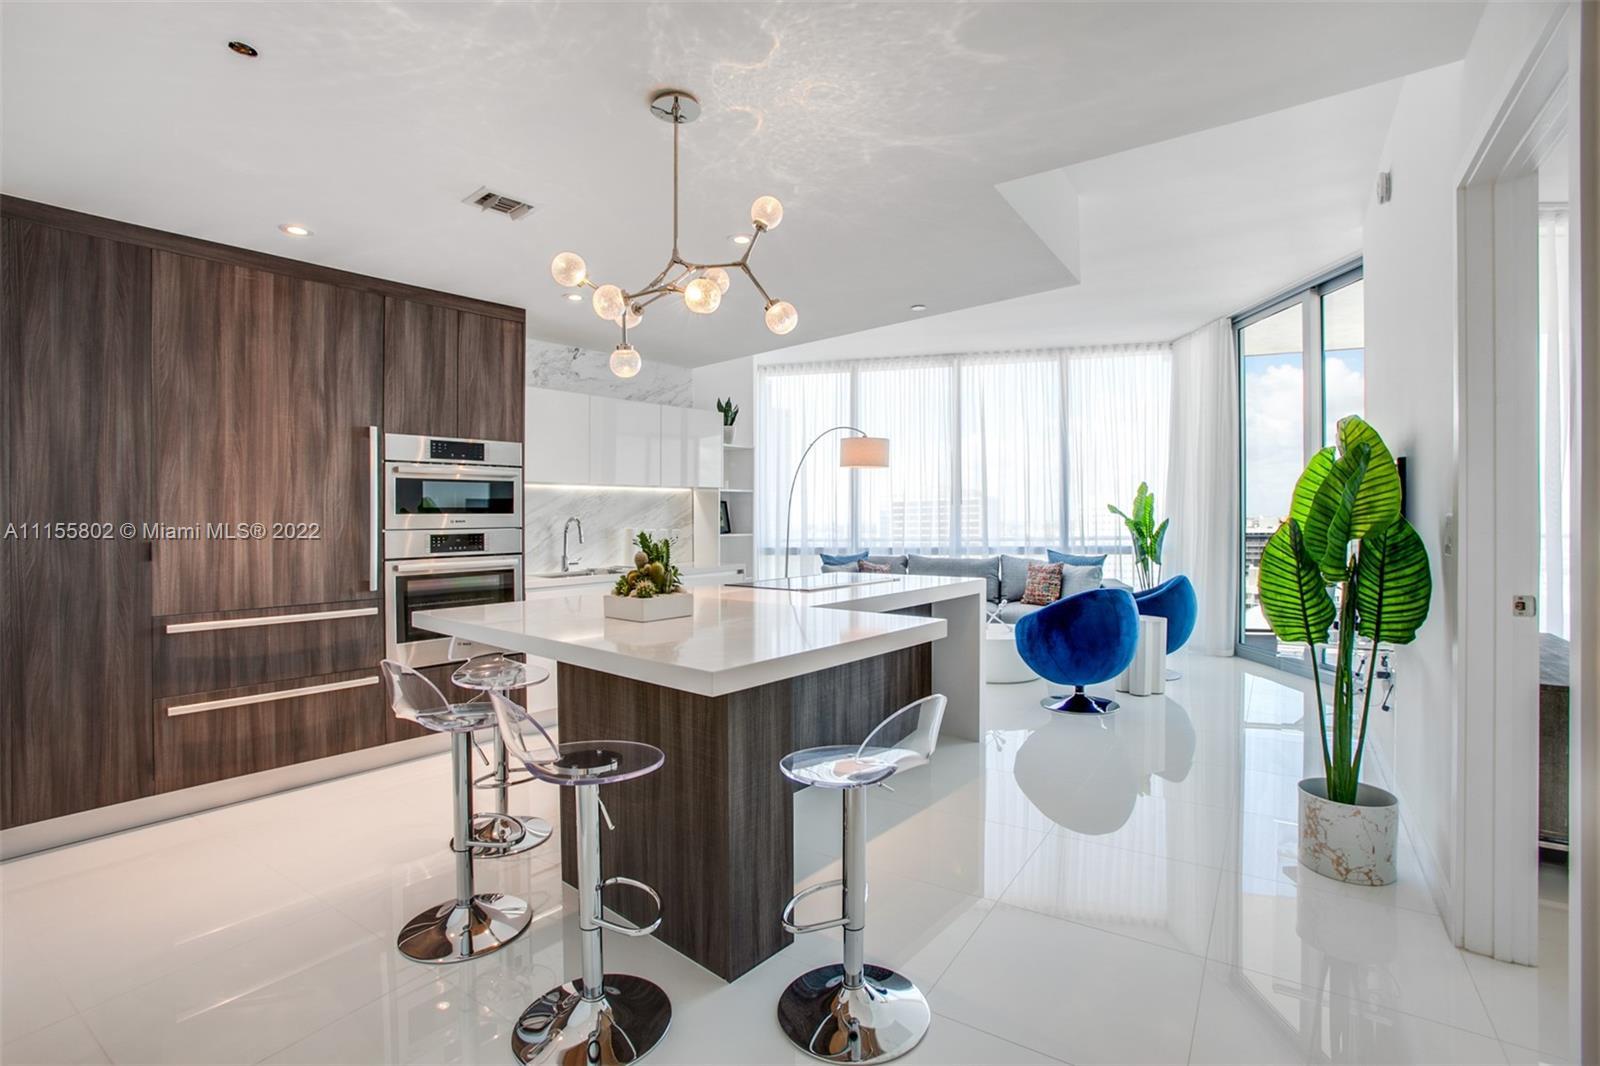 Luxury 1 Bed + Den /2 bath Residential Condo at the Miami World Center with 10 Foot ceilings and pri